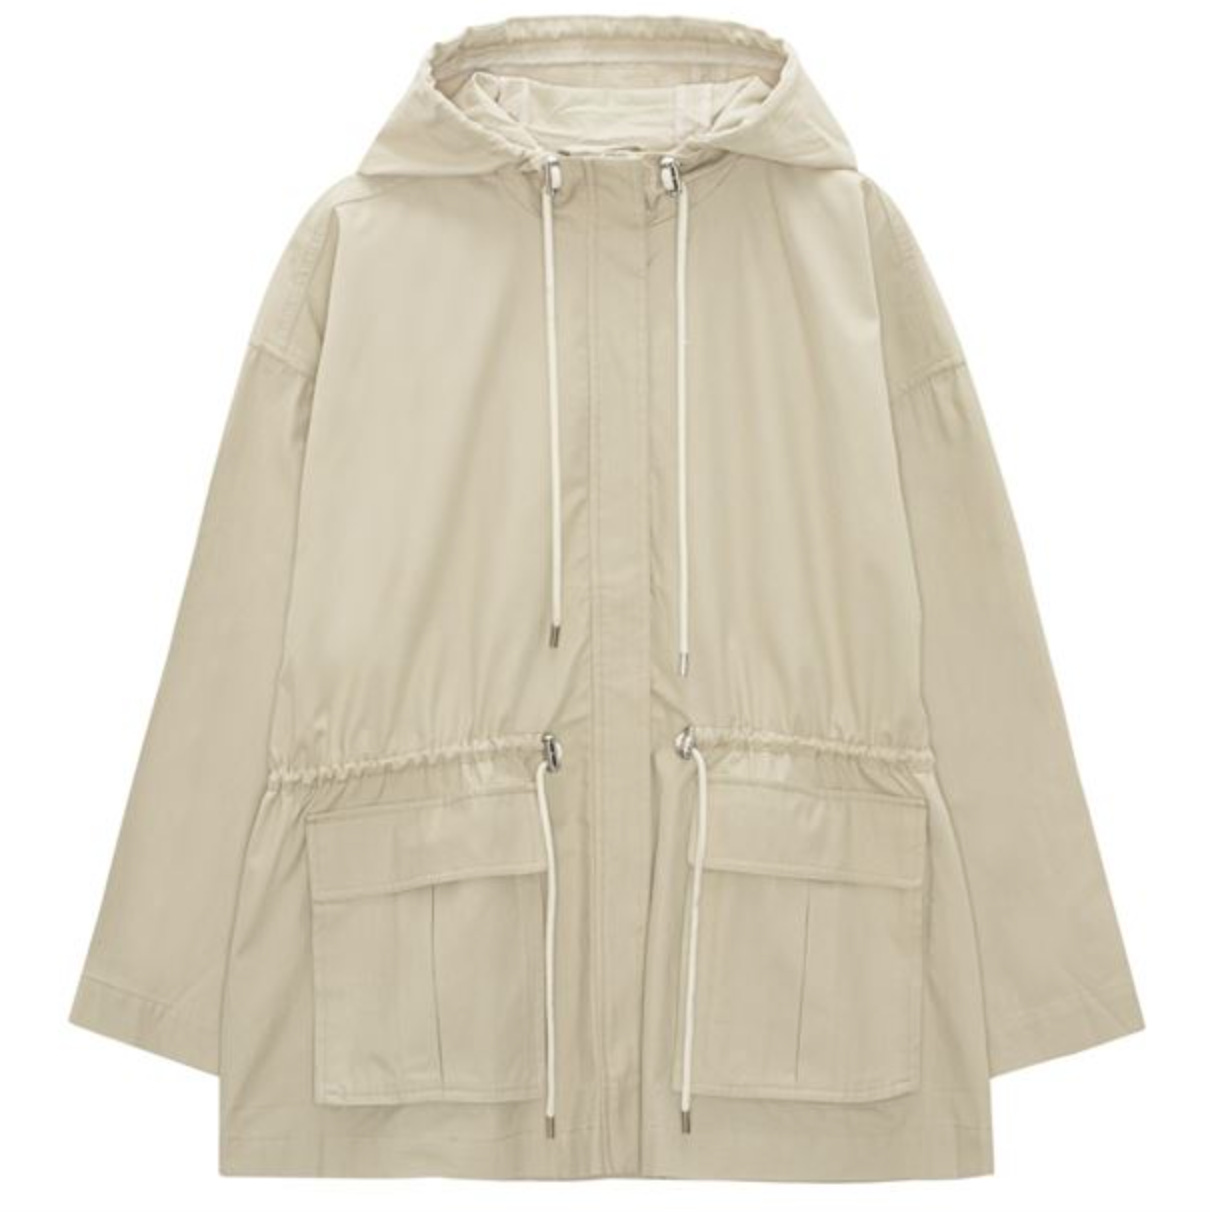 The best spring coat is parka shell a